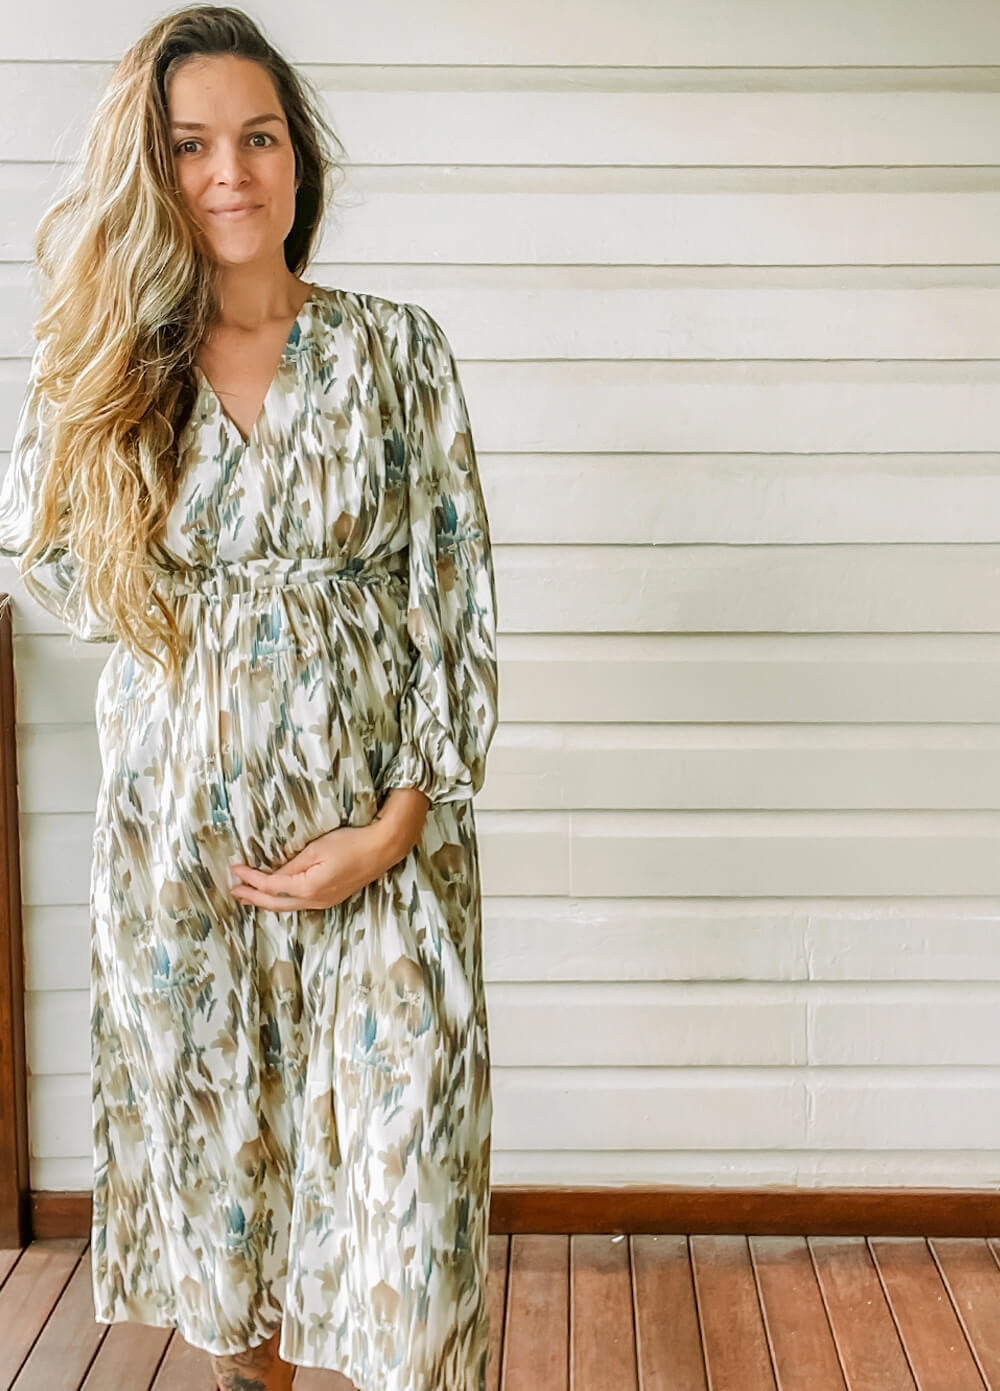 Lait & Co - Evie Maternity Midi Dress in Taupe Floral